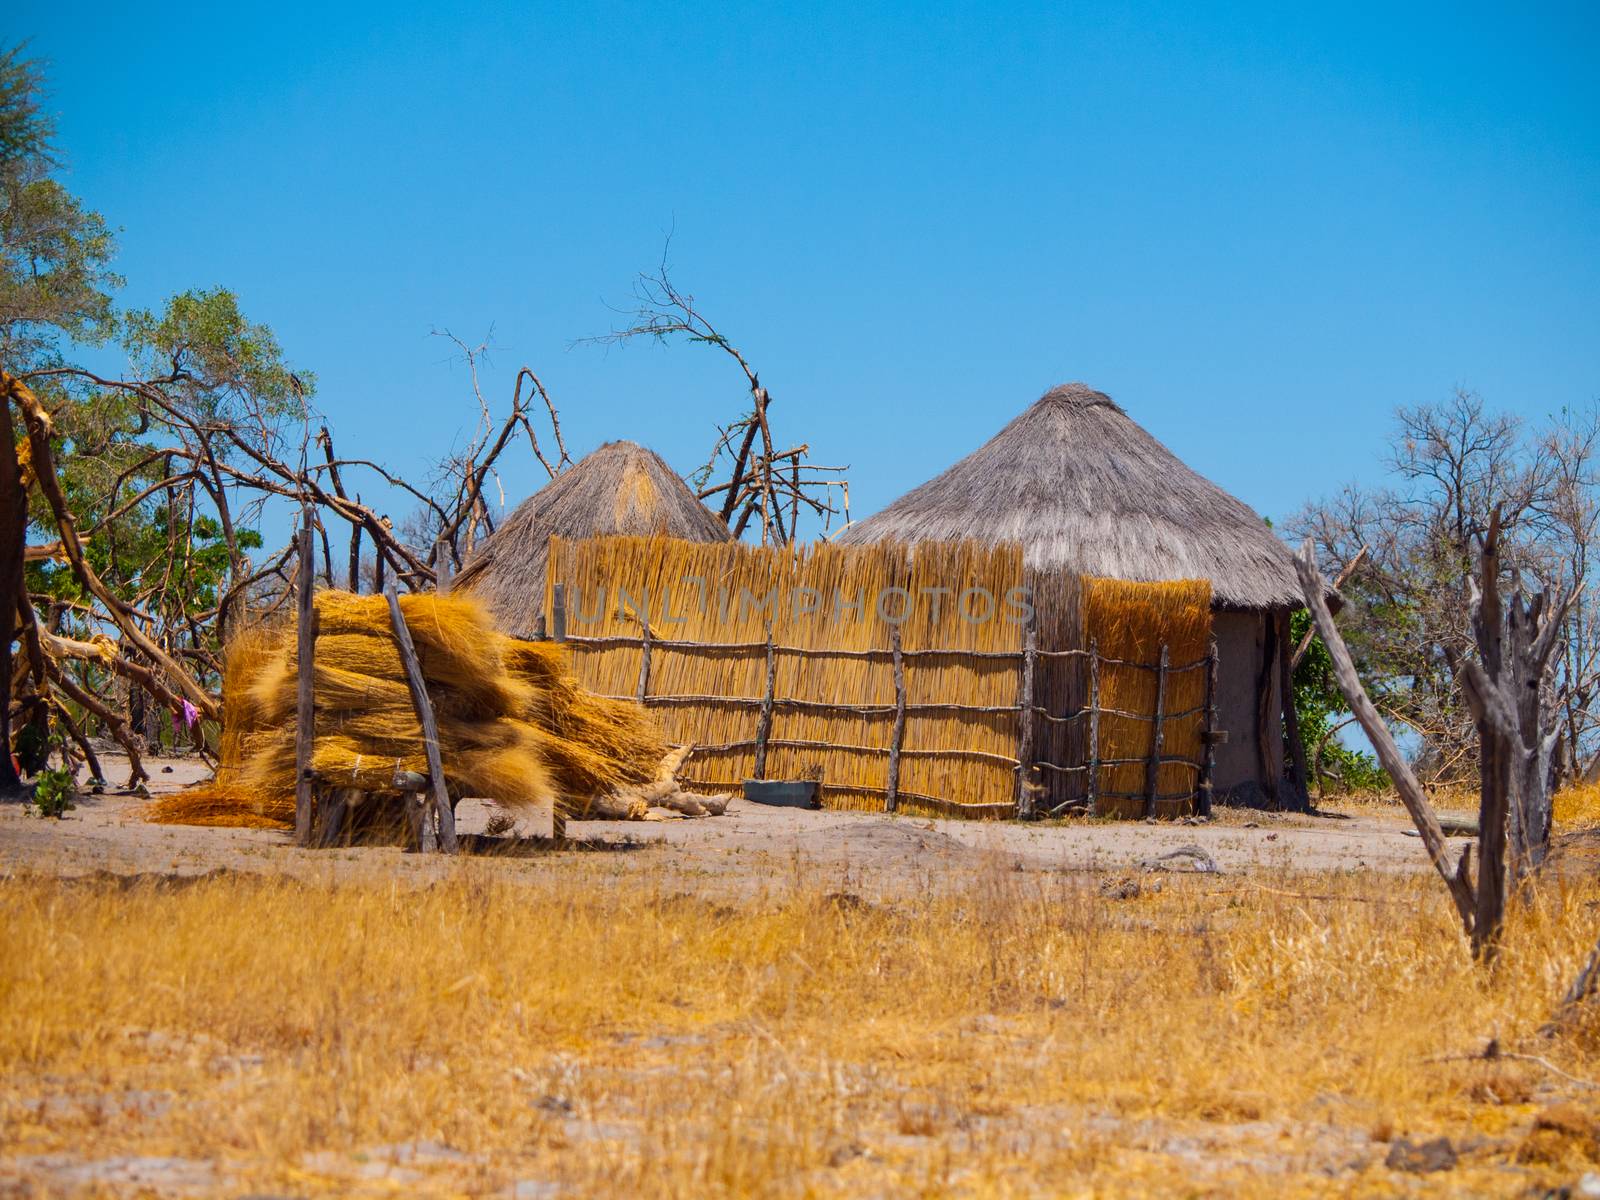 Strawy huts of african village by pyty